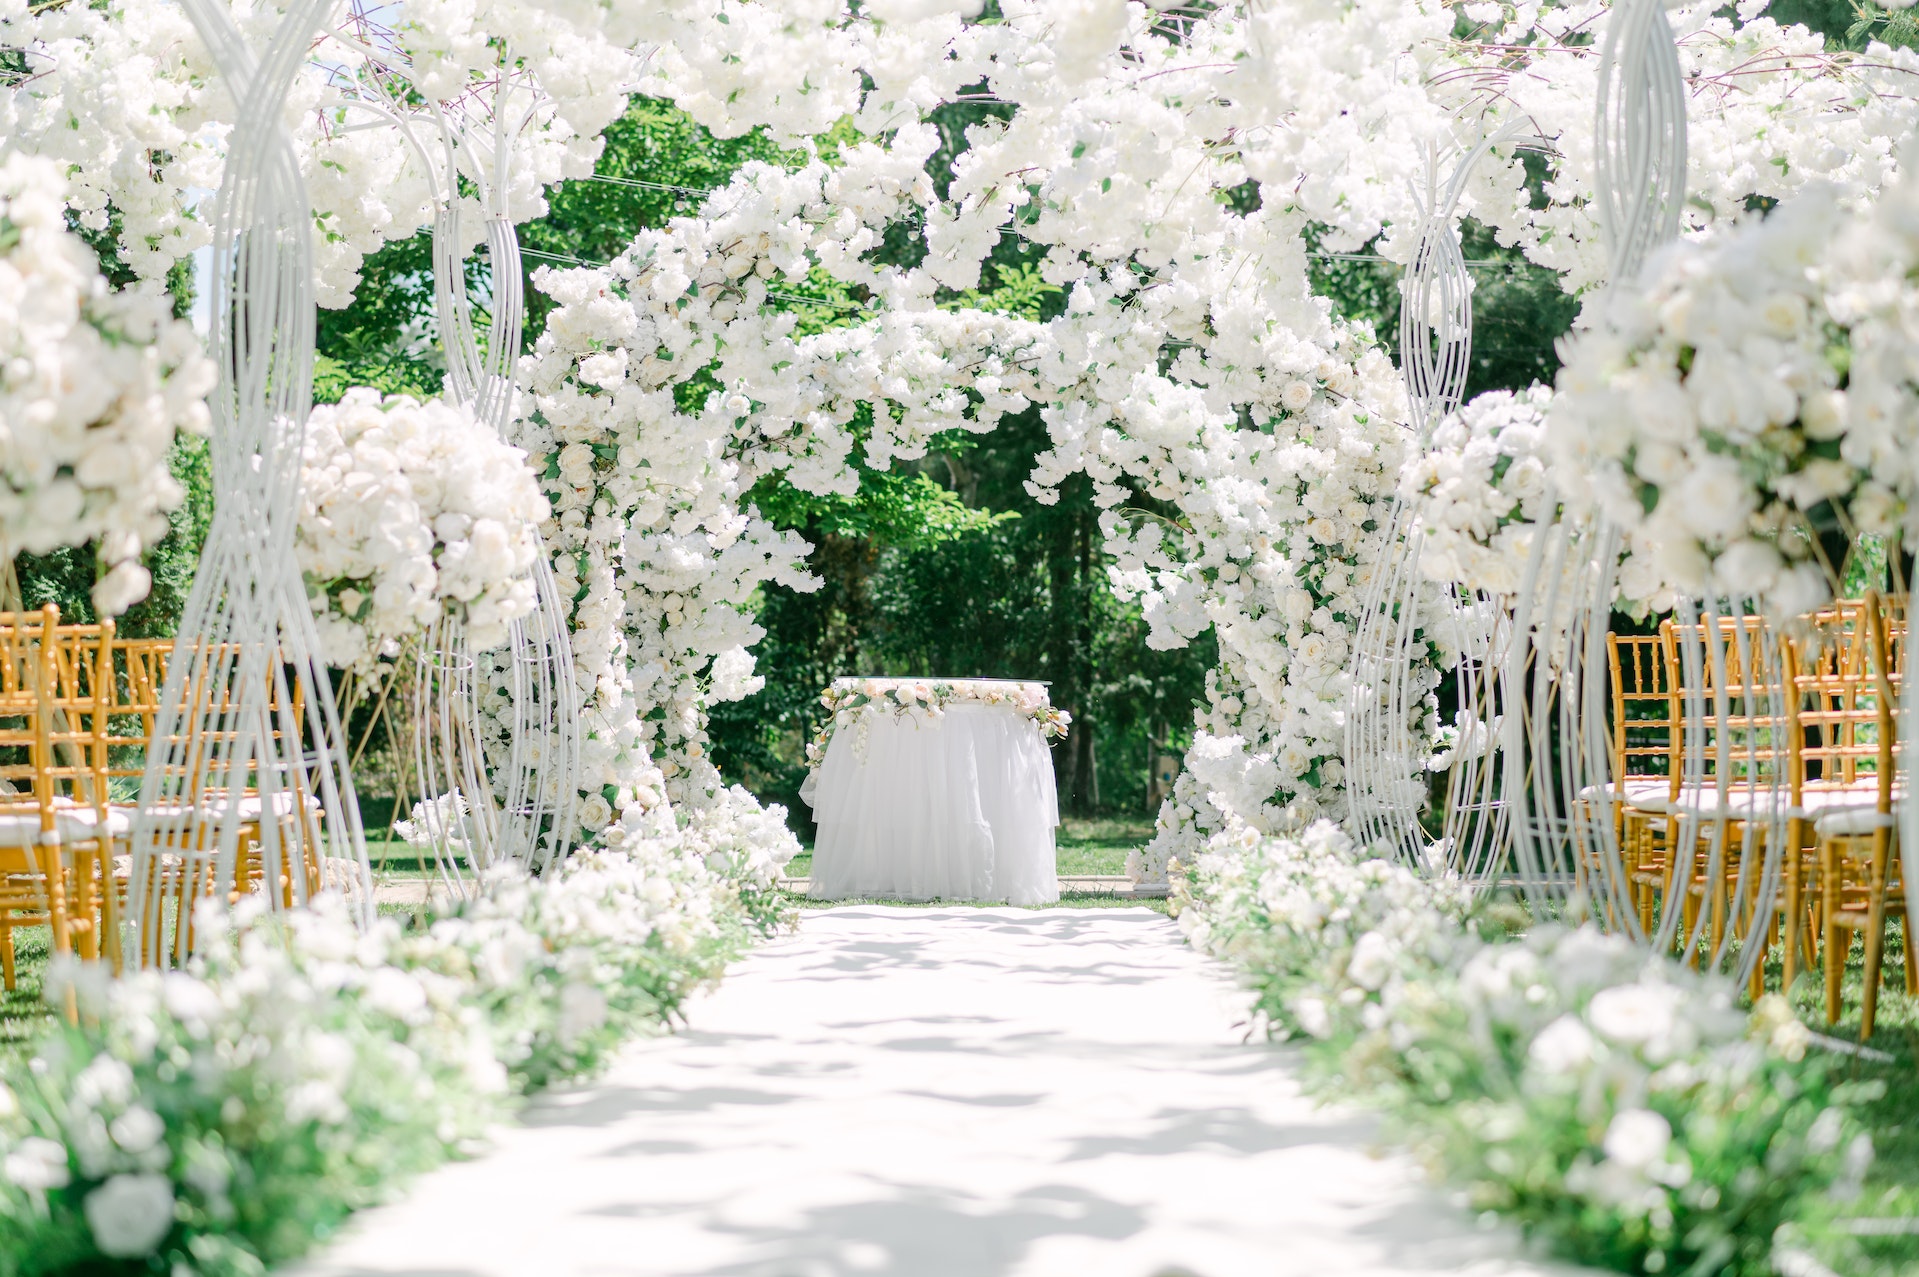 A wedding venue adorned with flowers | Source: Pexels